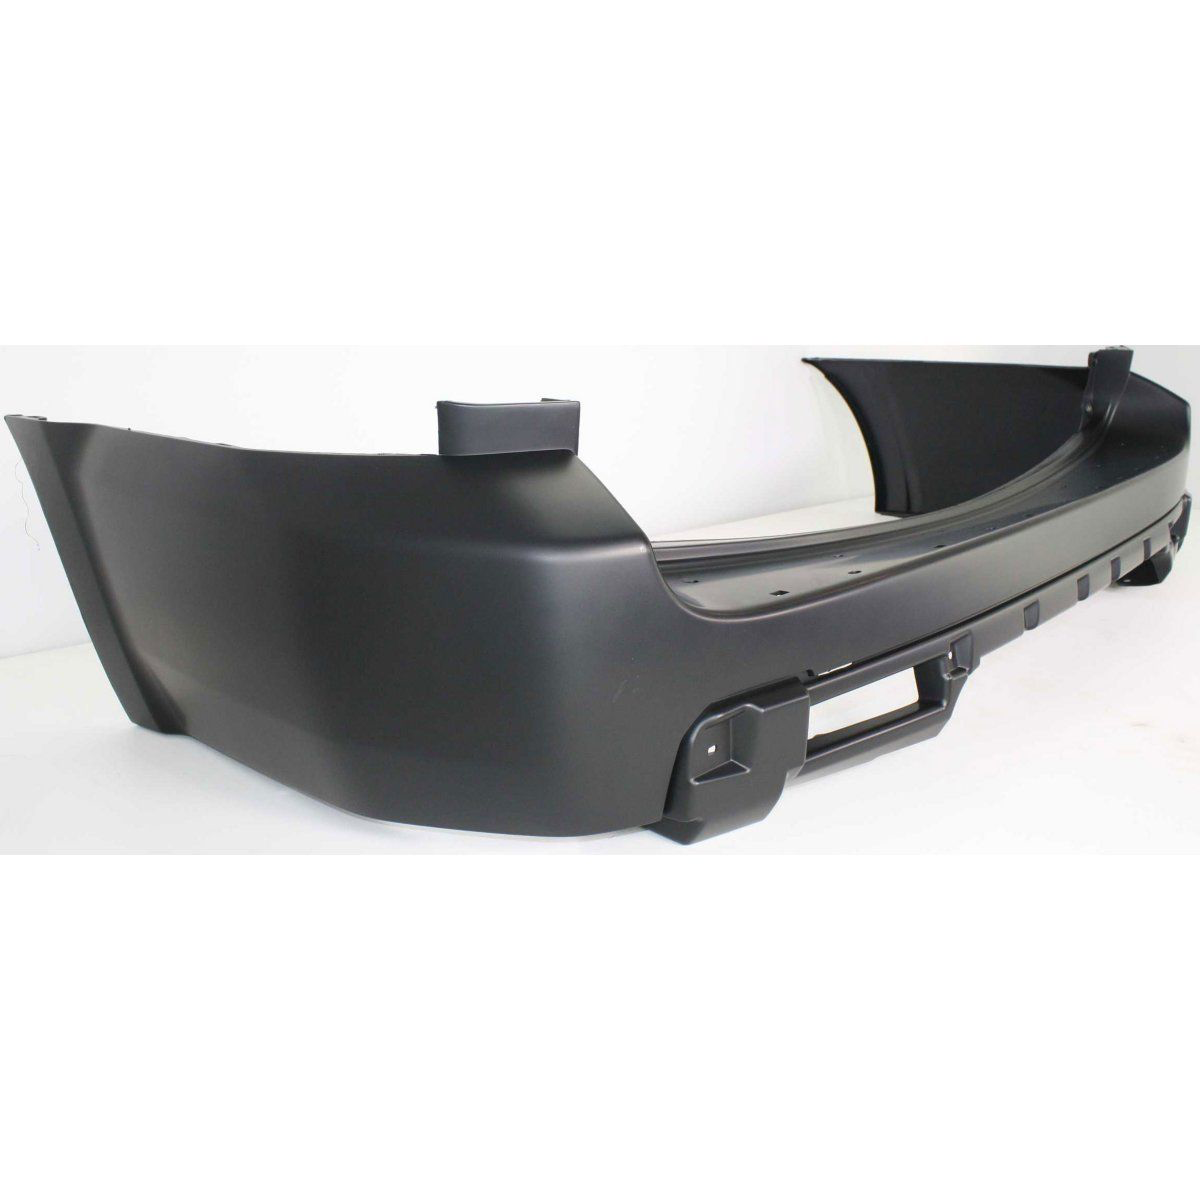 2006-2008 HONDA PILOT Rear Bumper Cover Painted to Match